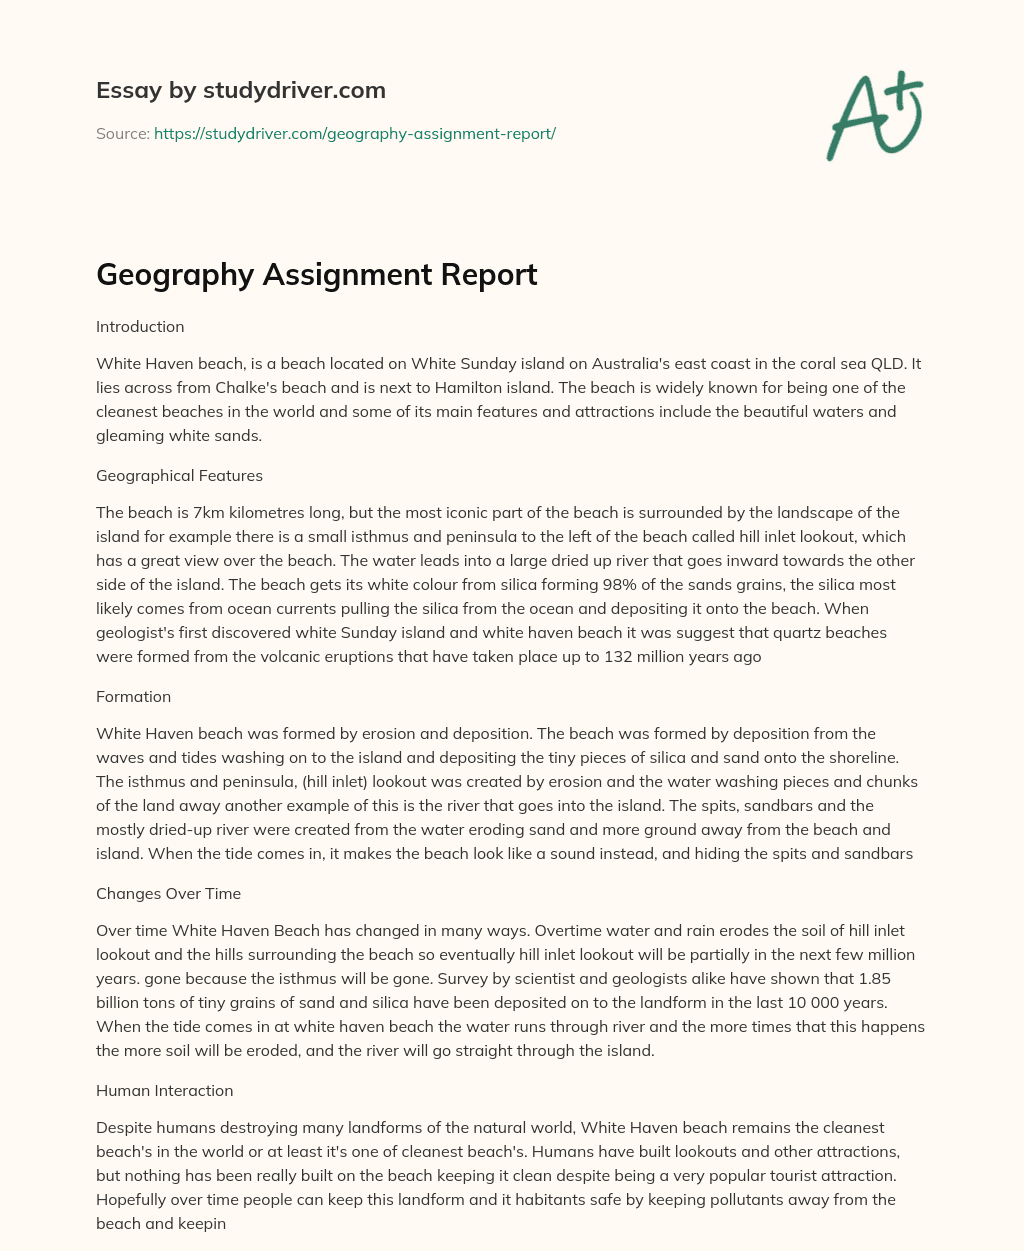 Geography Assignment Report essay